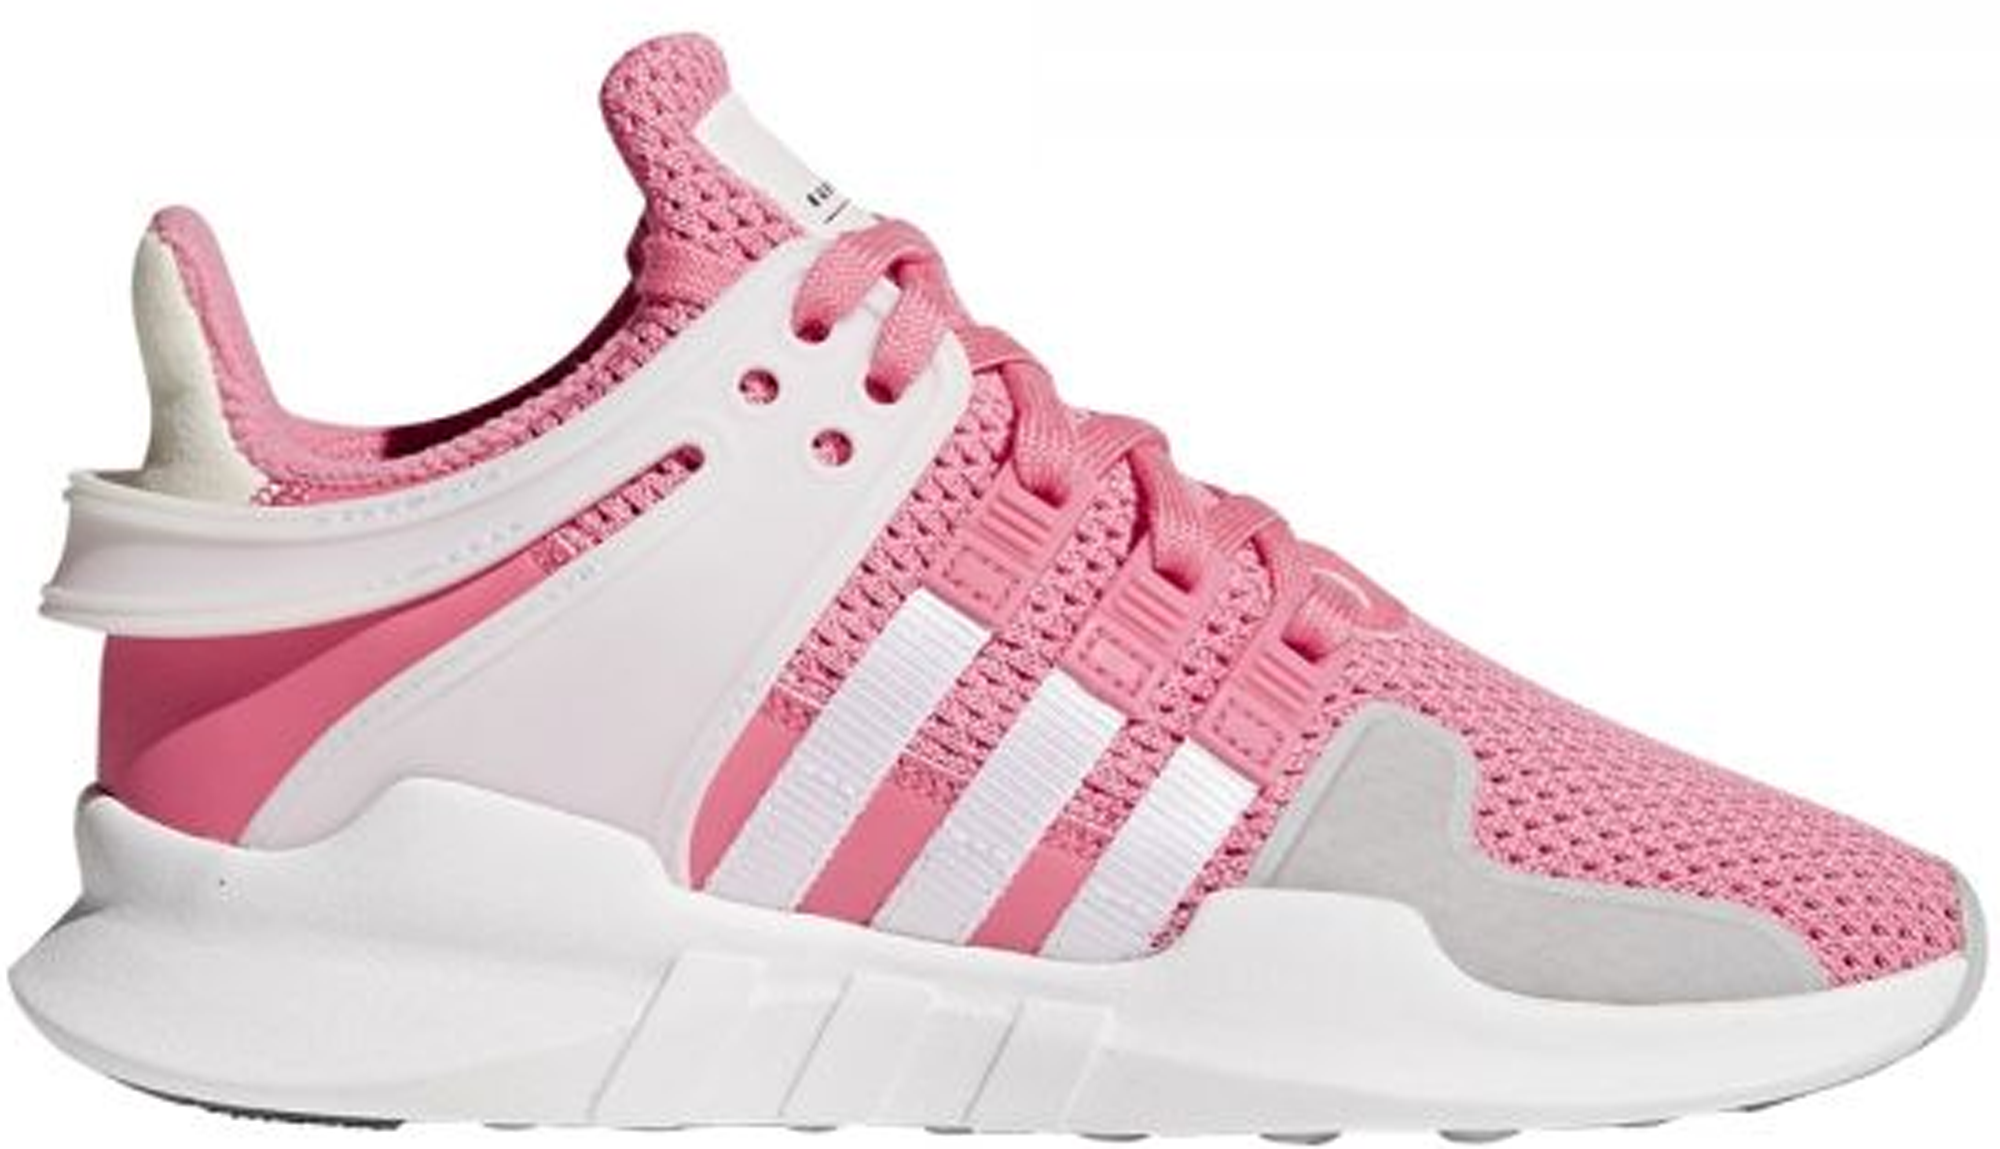 adidas EQT Support Adv Pink White 